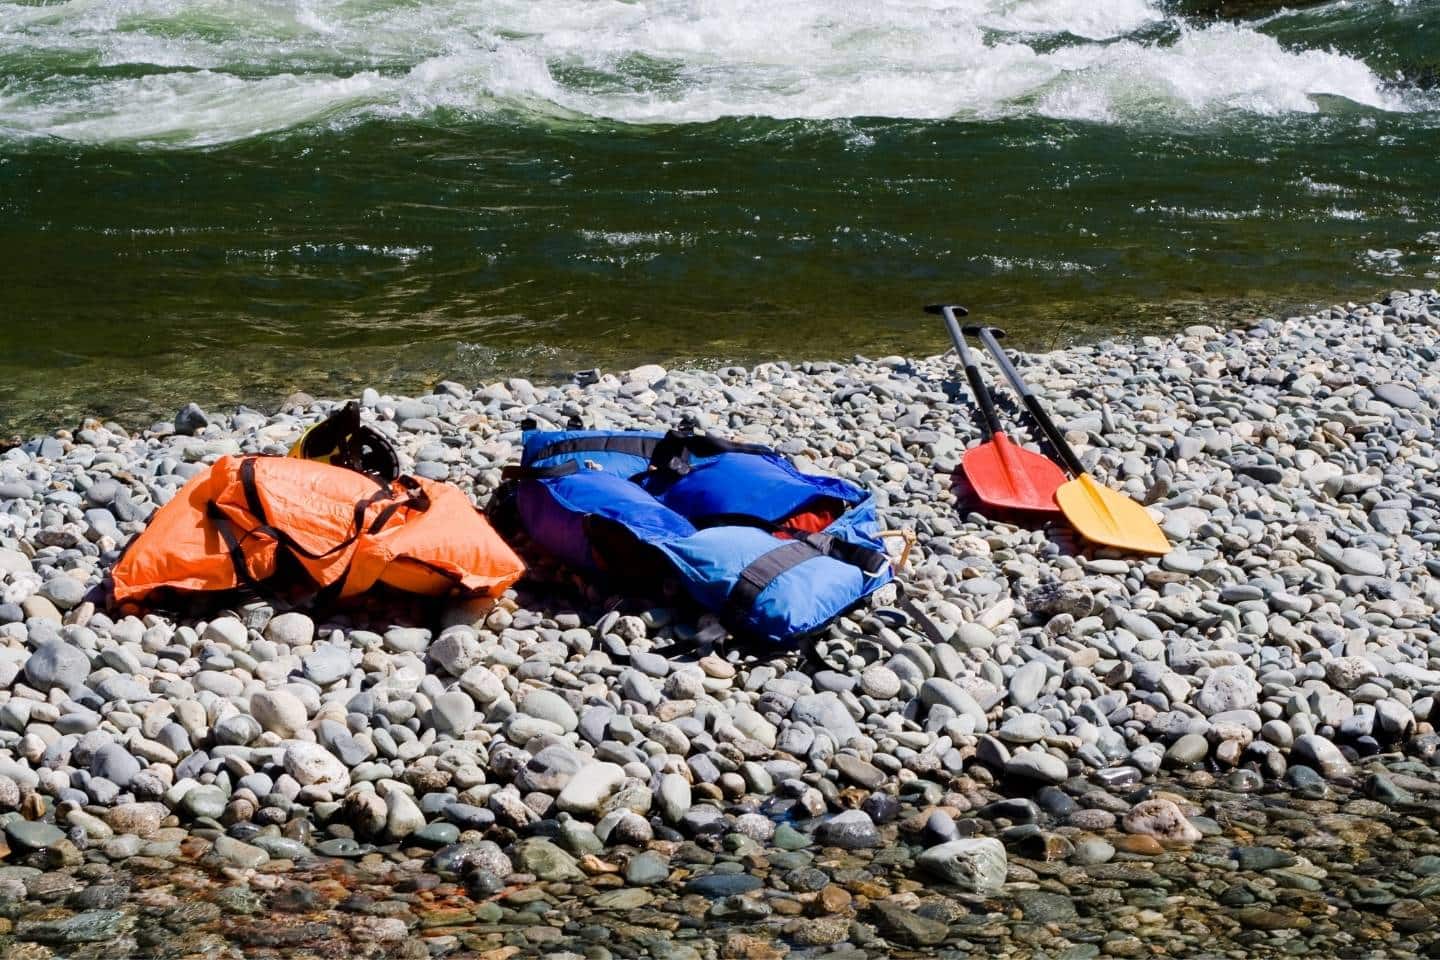 Two life jackets and two paddles on stones near the stream